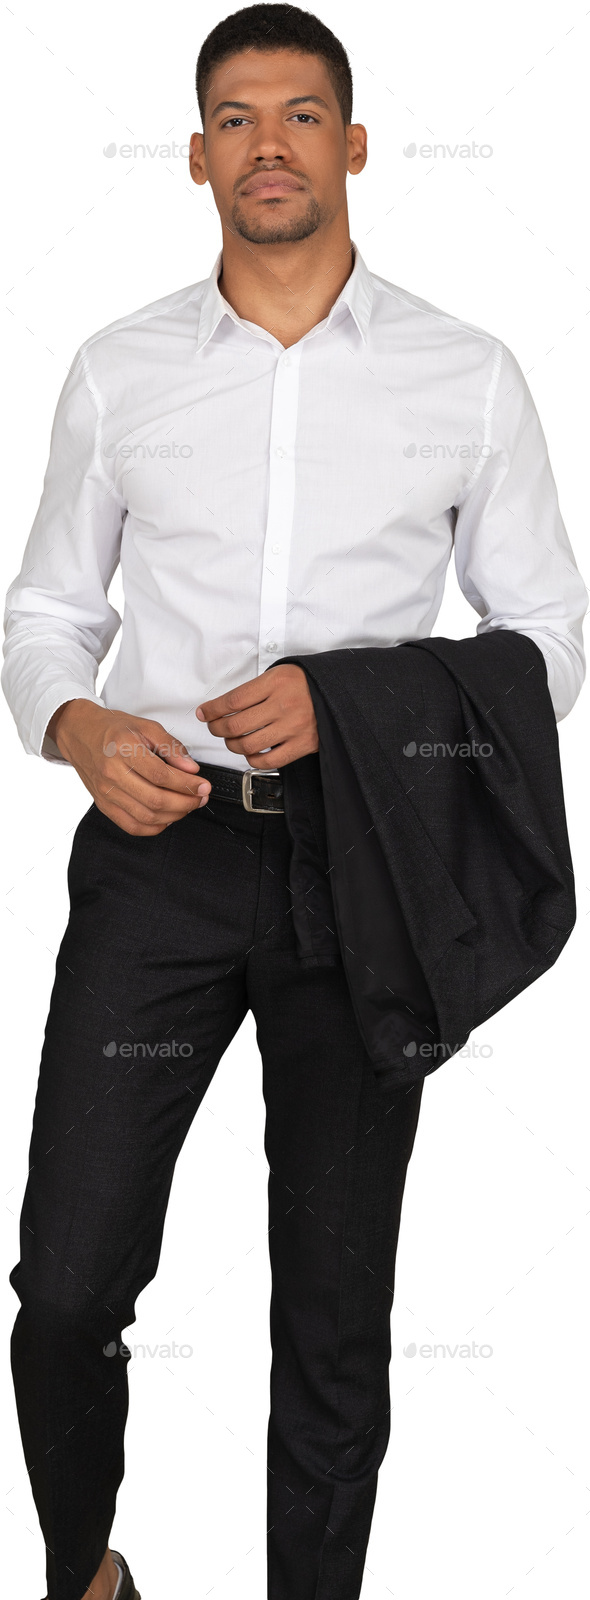 White Shirt With Black Pant Combination For Business Casual Look | Mens  casual outfits summer, Outfit combinations, Mens outfits